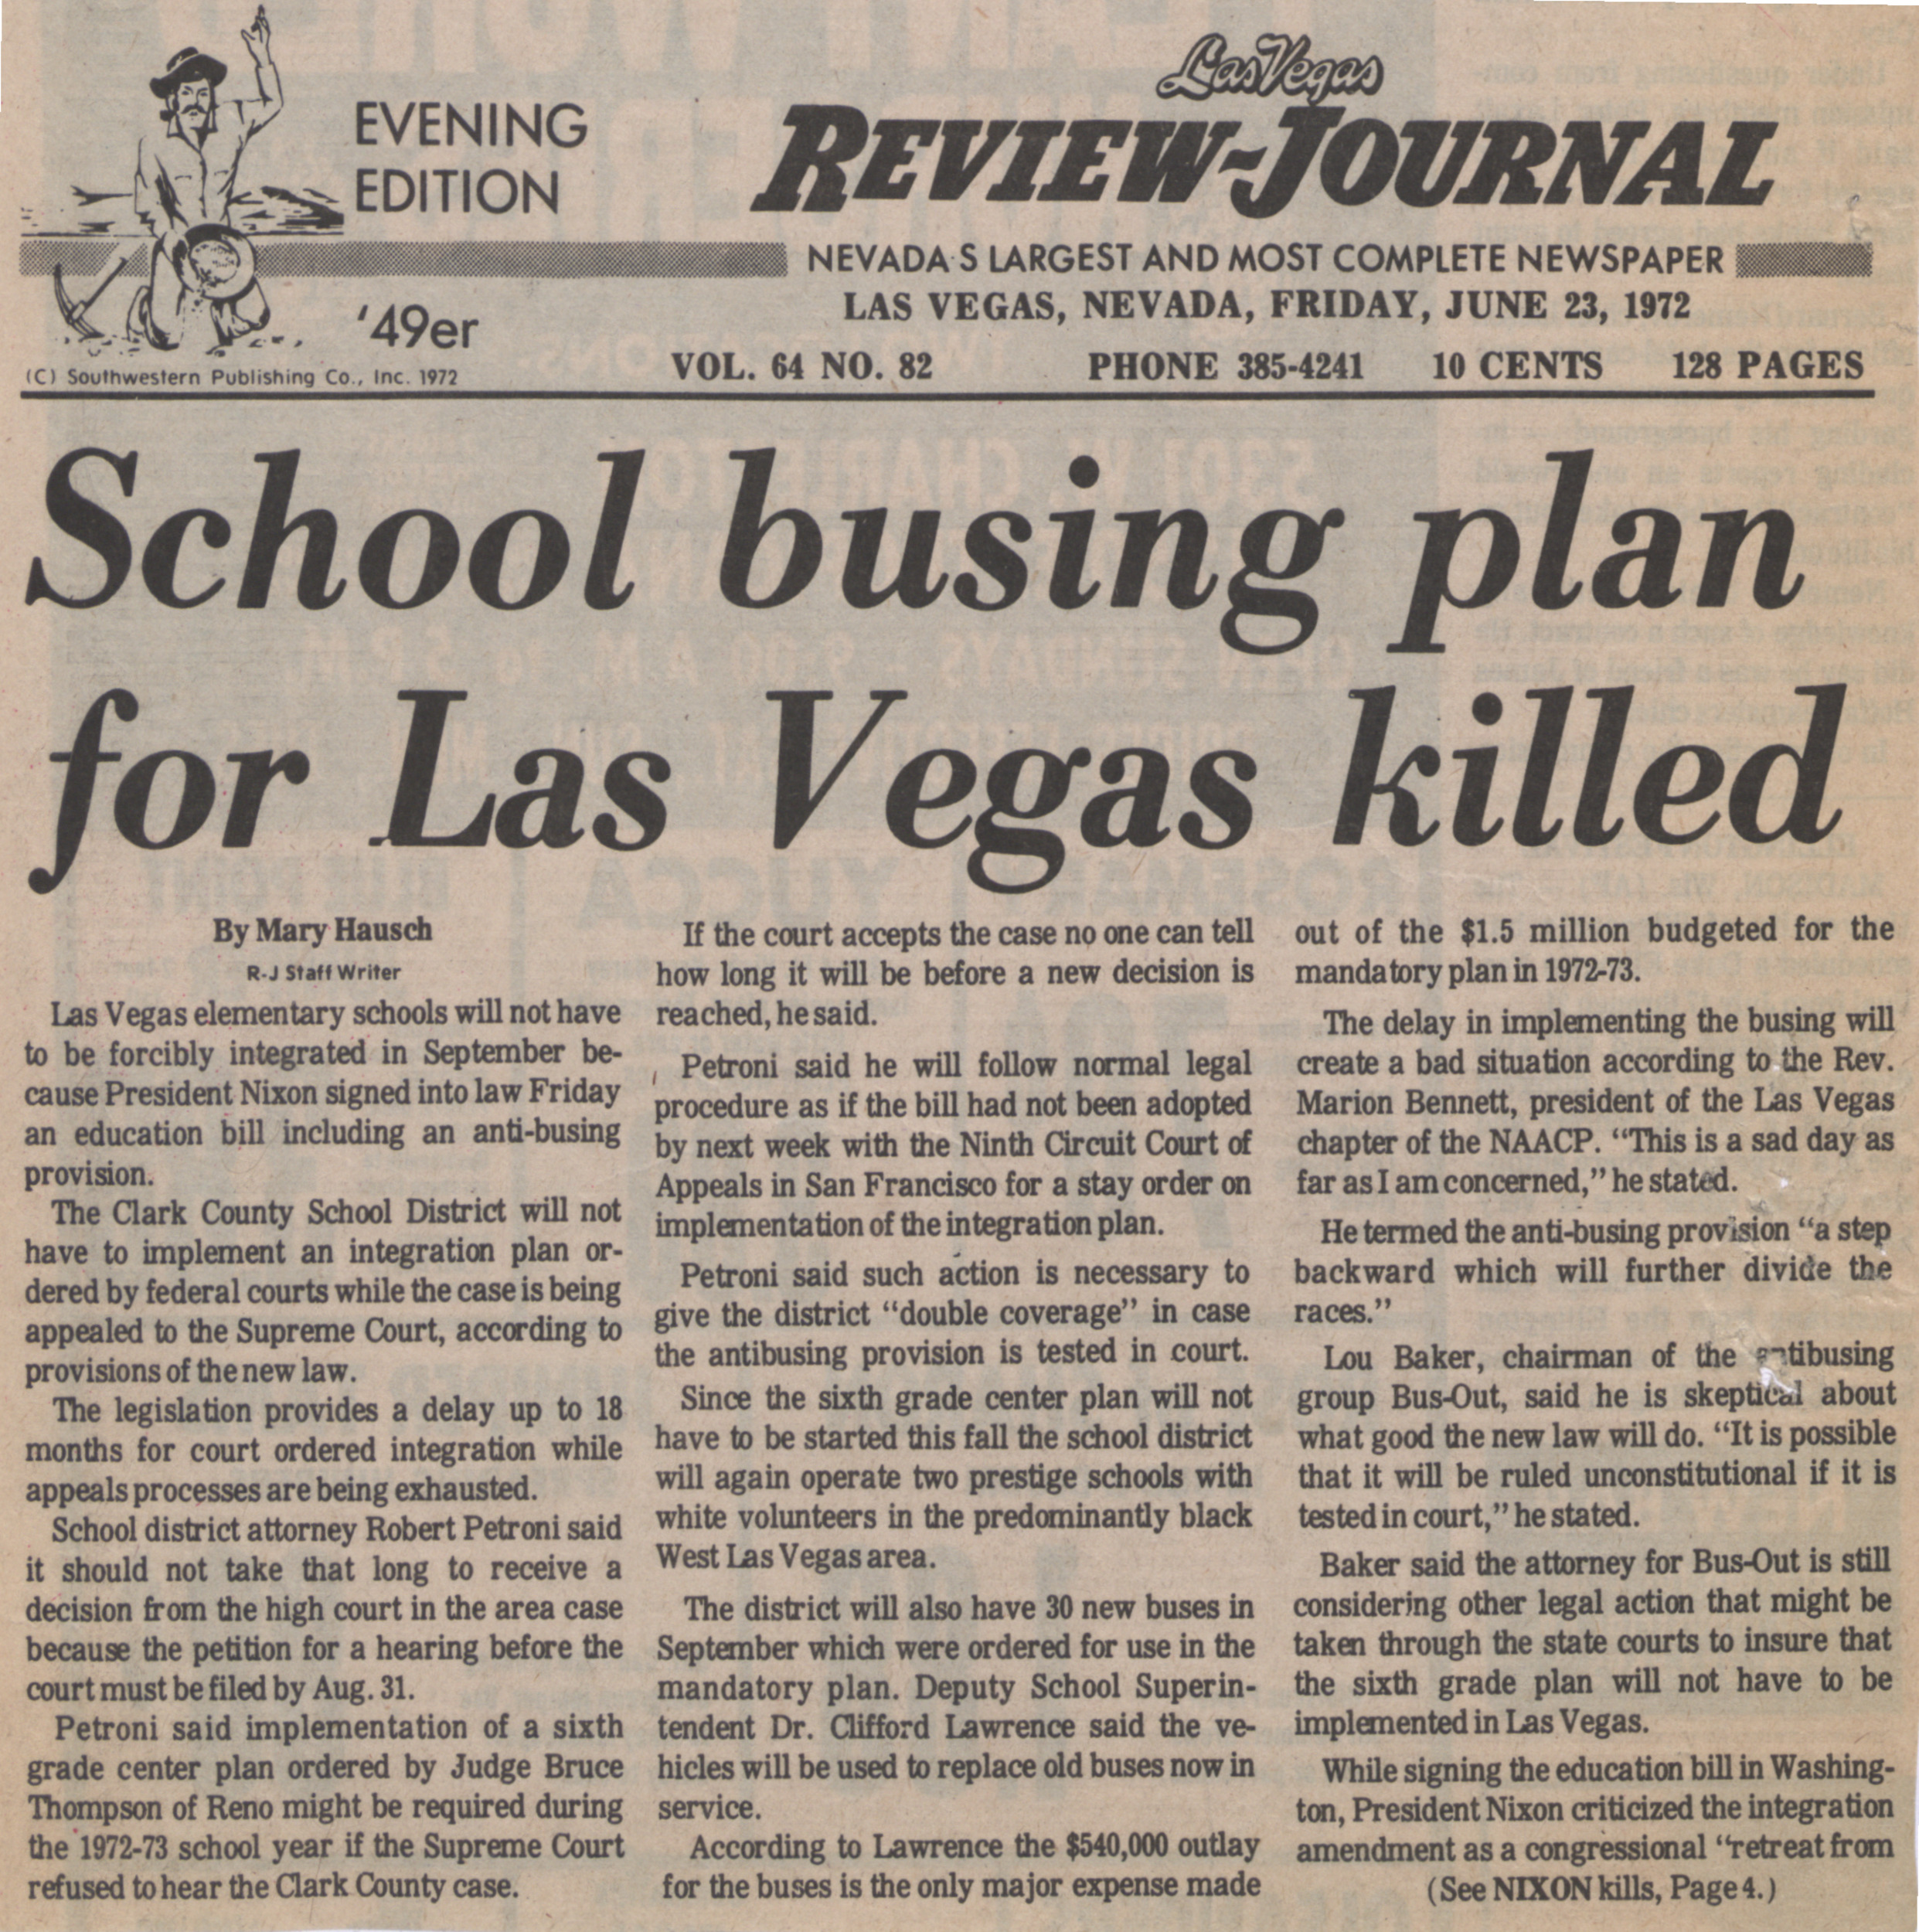 Newspaper clipping, School busing plan for Las Vegas killed, Las Vegas Review-Journal, evening edition, June 23, 1972